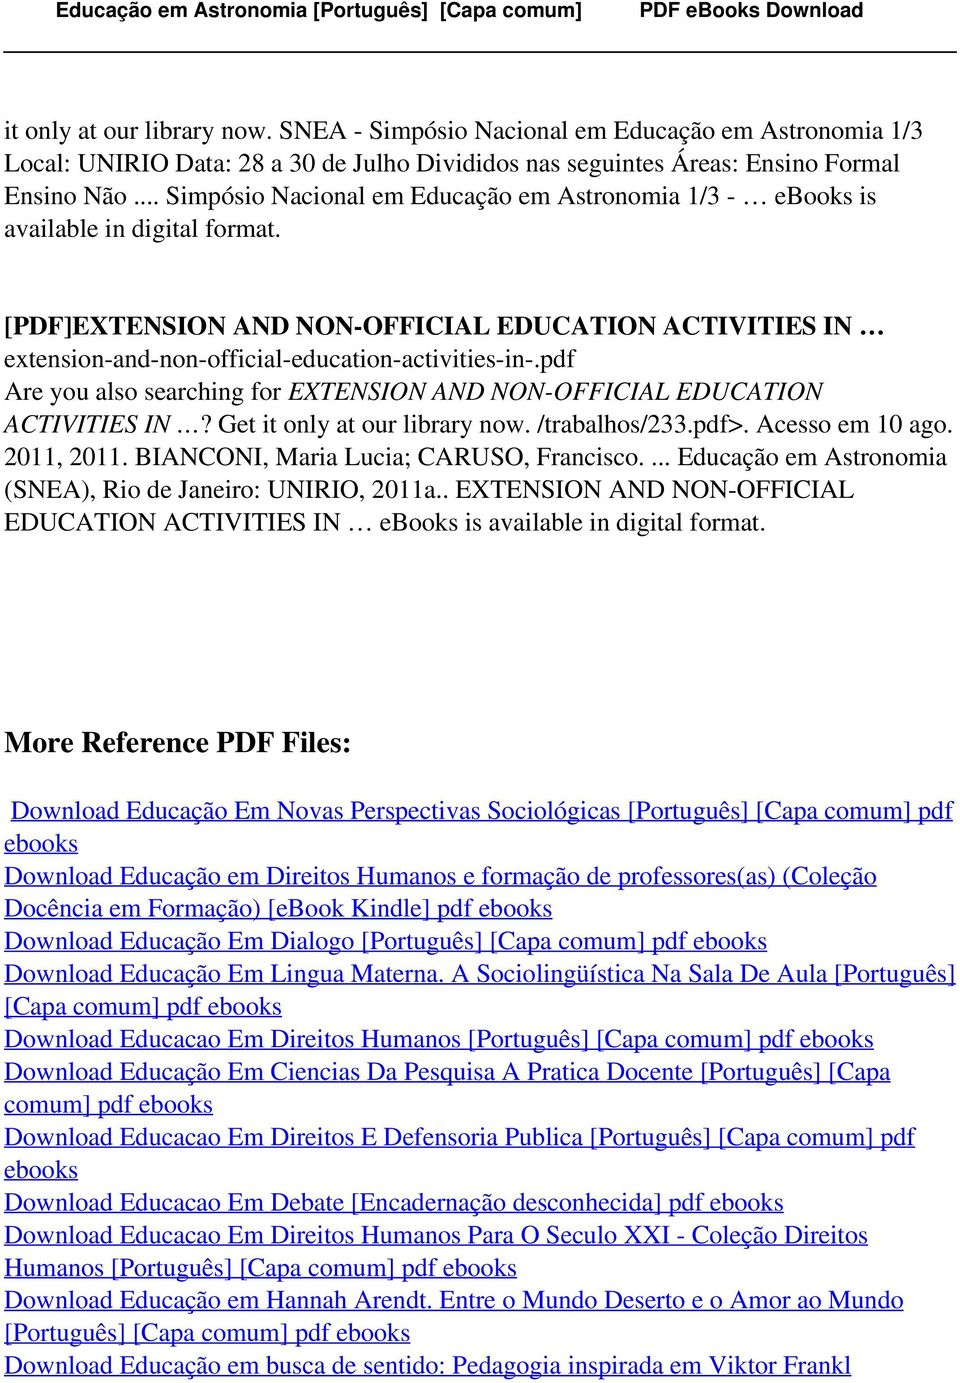 pdf Are you also searching for EXTENSION AND NON-OFFICIAL EDUCATION ACTIVITIES IN? Get it only at our library now. /trabalhos/233.pdf>. Acesso em 10 ago. 2011, 2011.